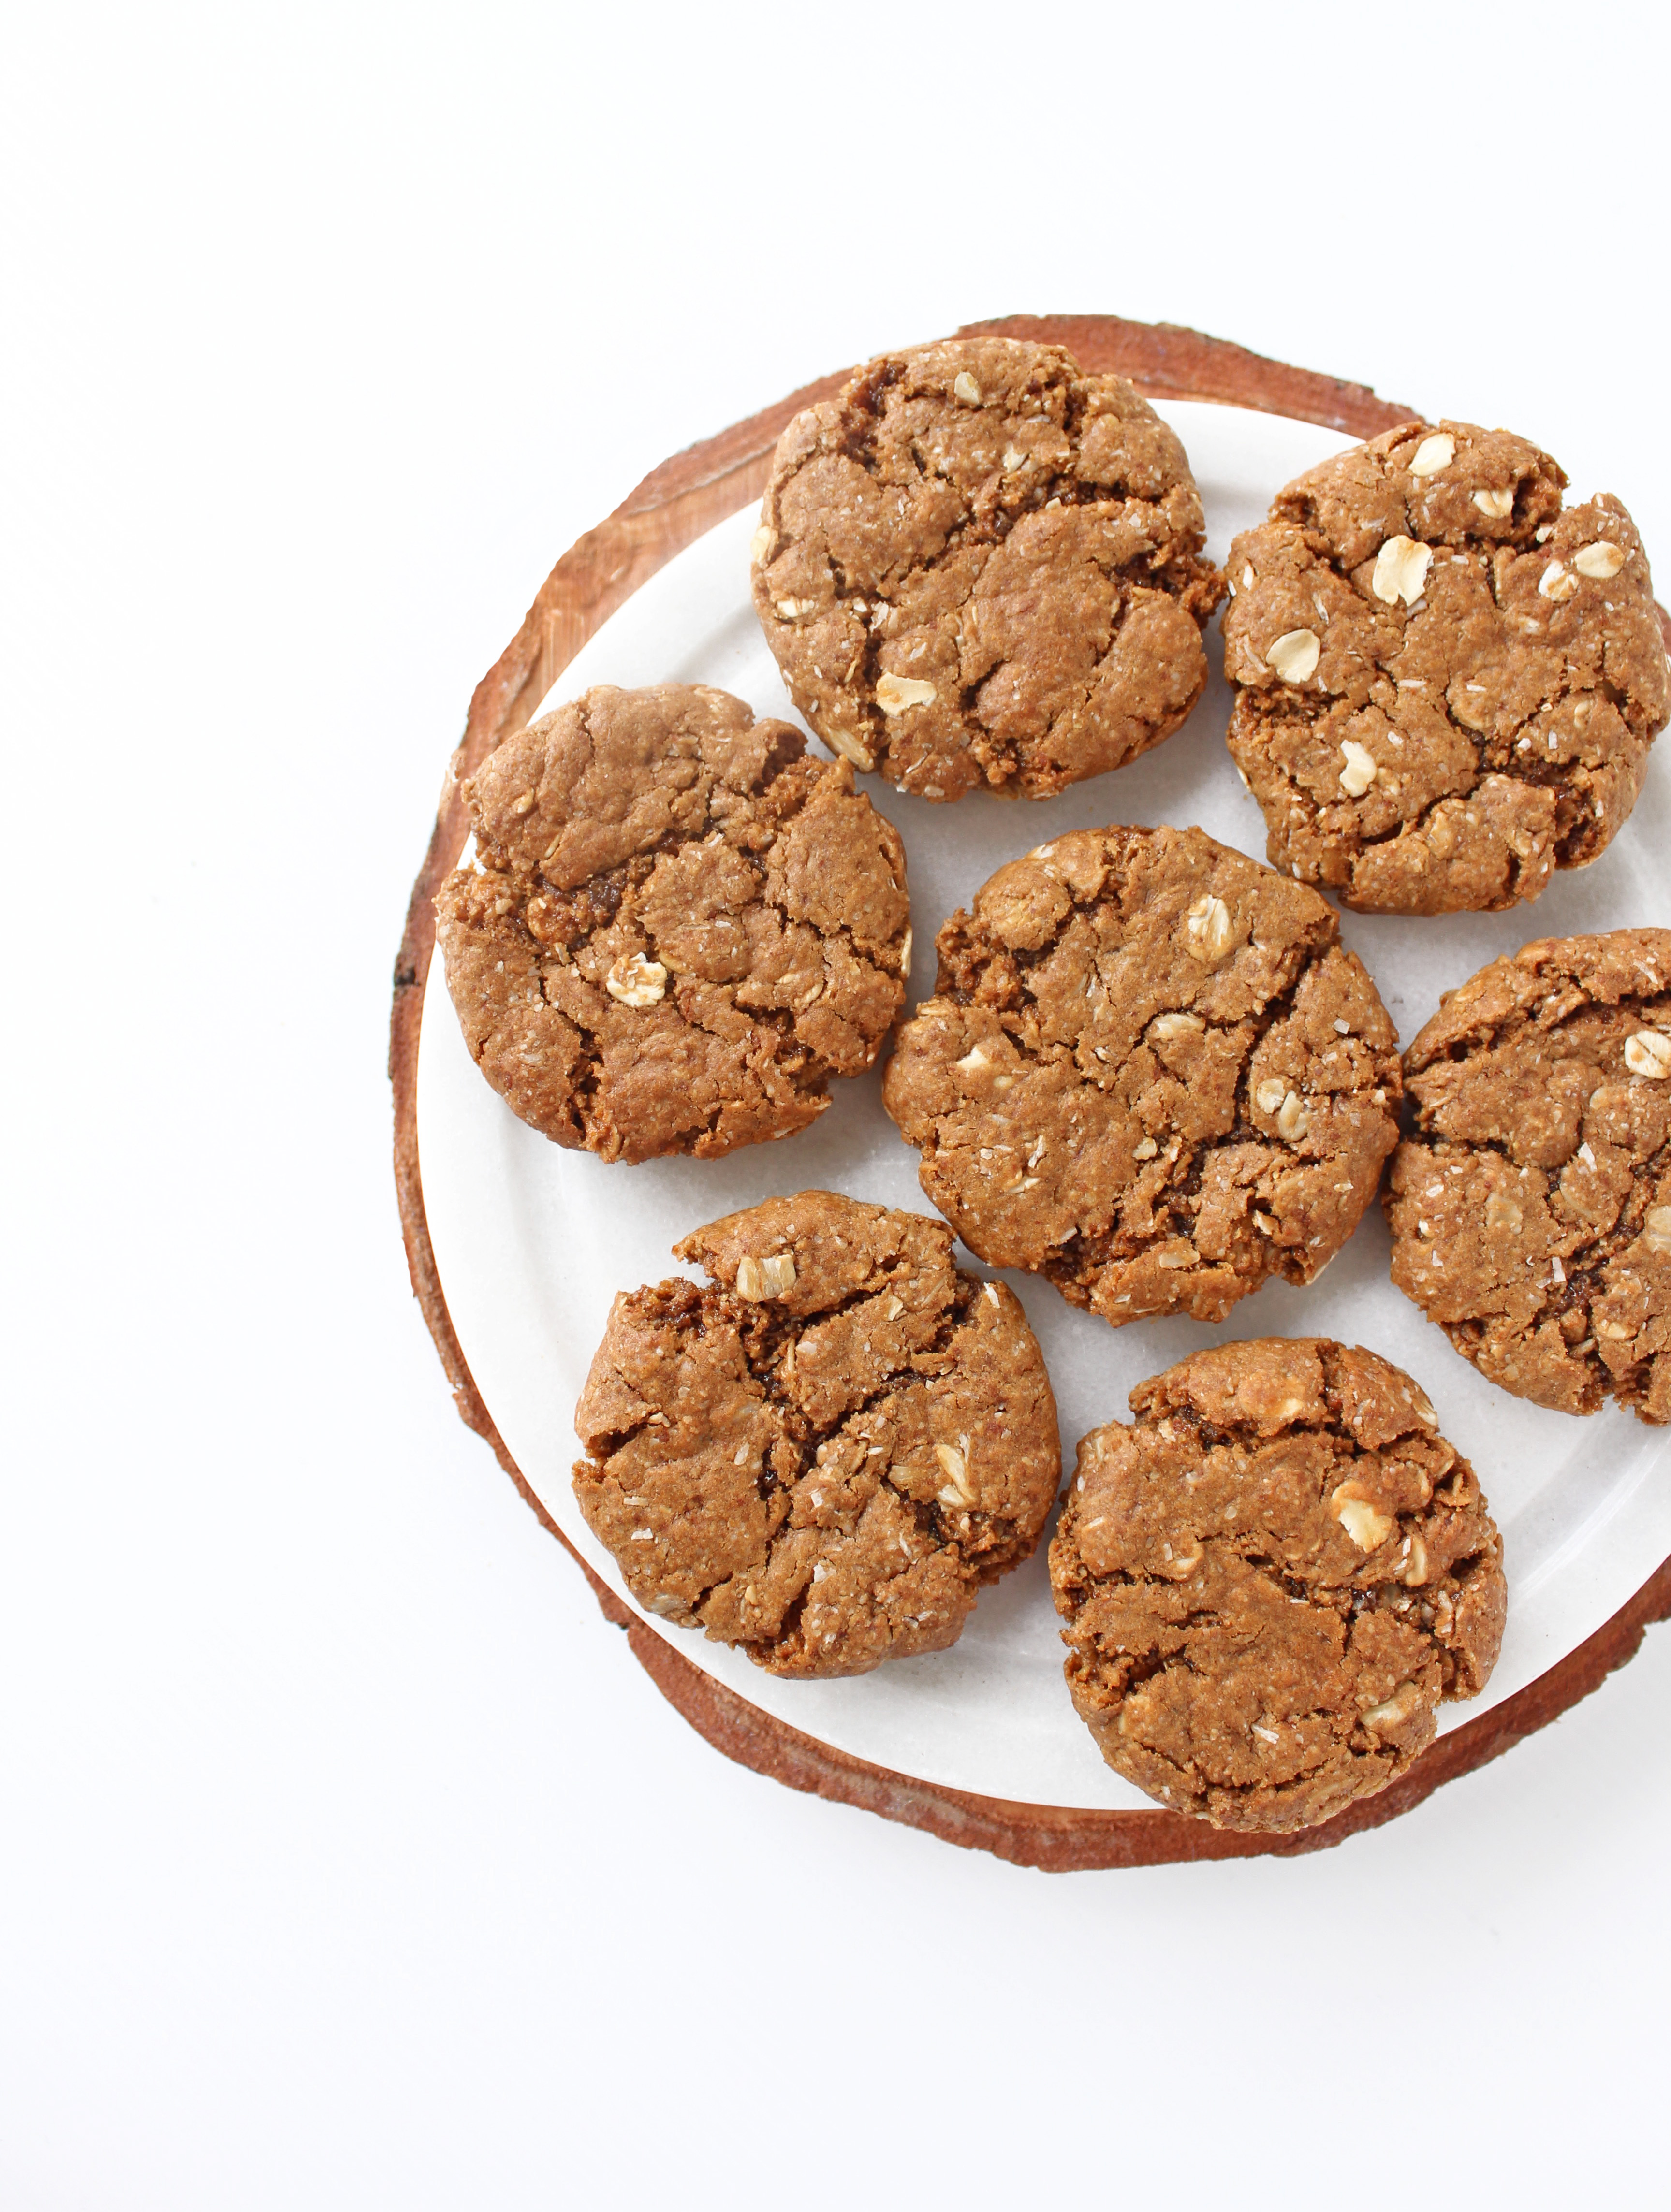 A plateful of golden, chewy Vegan Anzac biscuits. Healthy, plantbased, gluten free sugar free anzac cookies